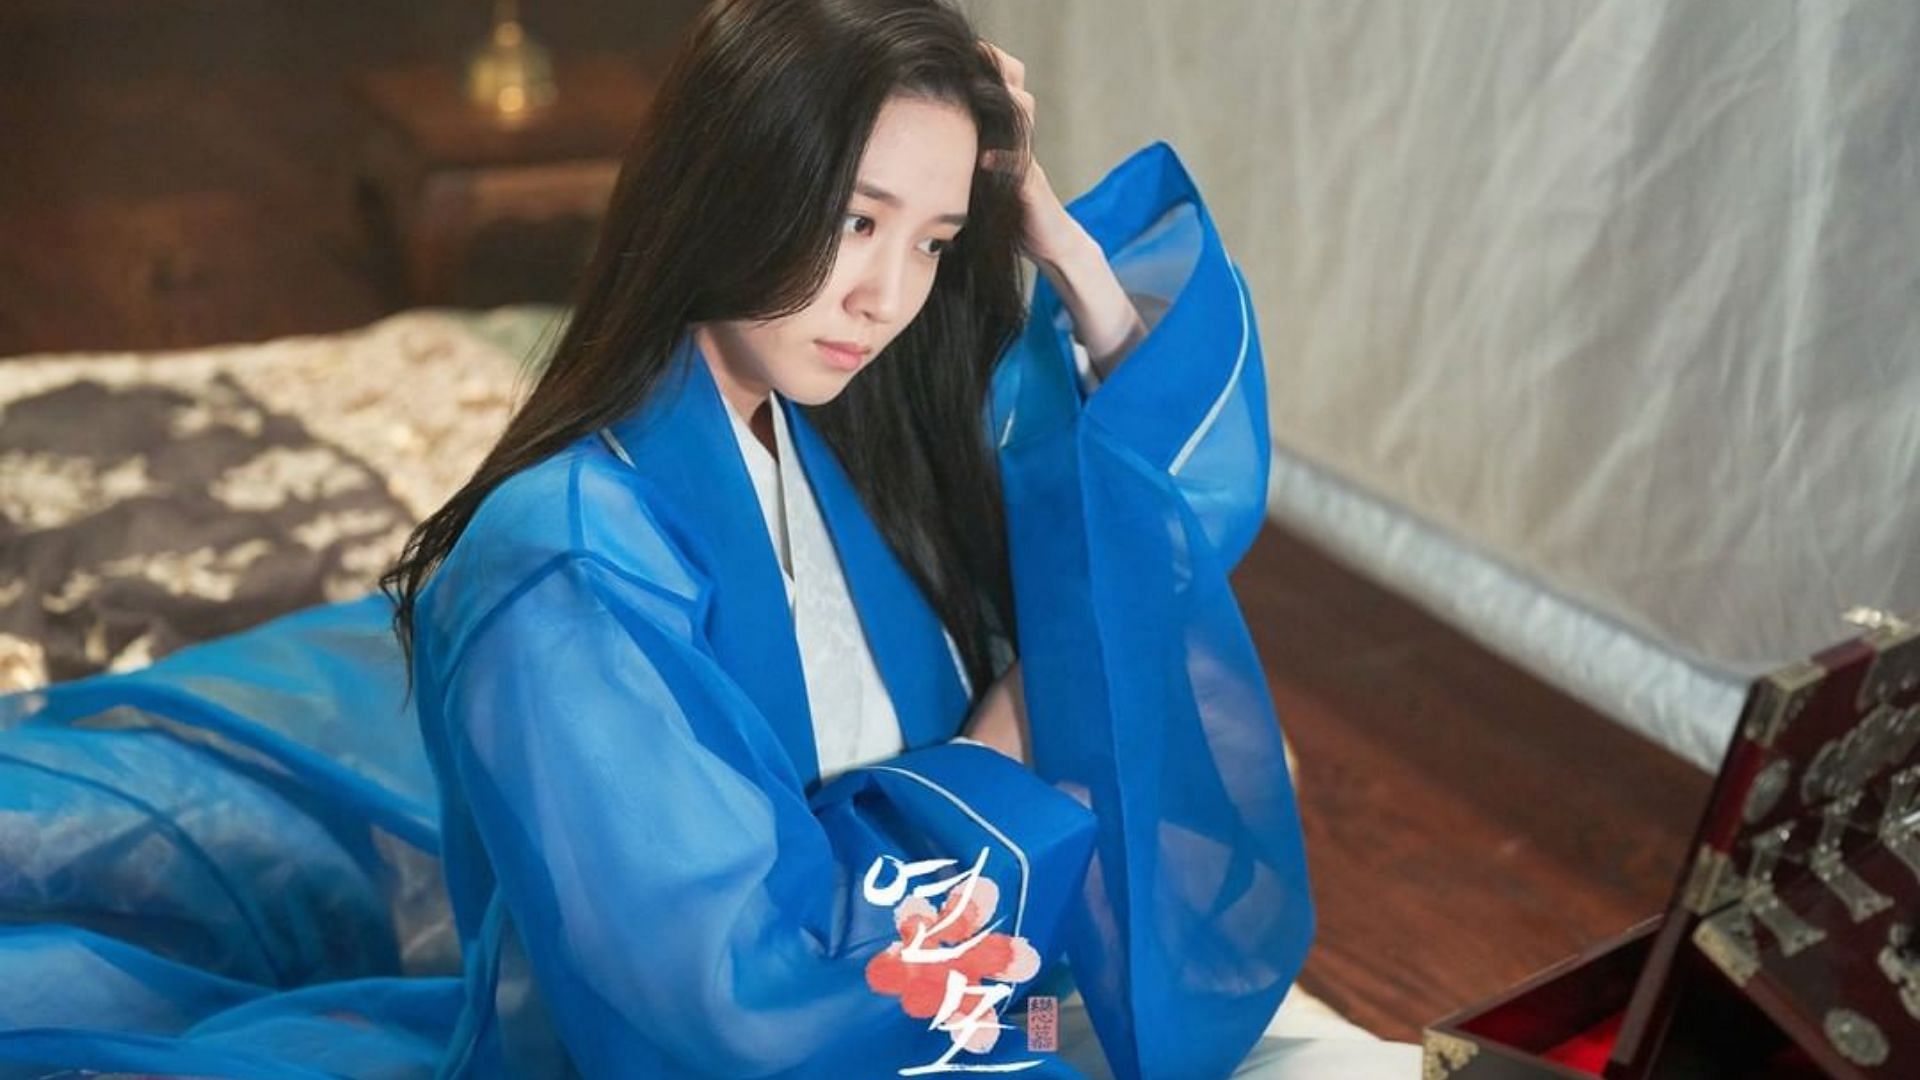 A still of Paek Eun Bin in The King&rsquo;s Affection, episode 11 (Image via KBS Drama/Instagram)